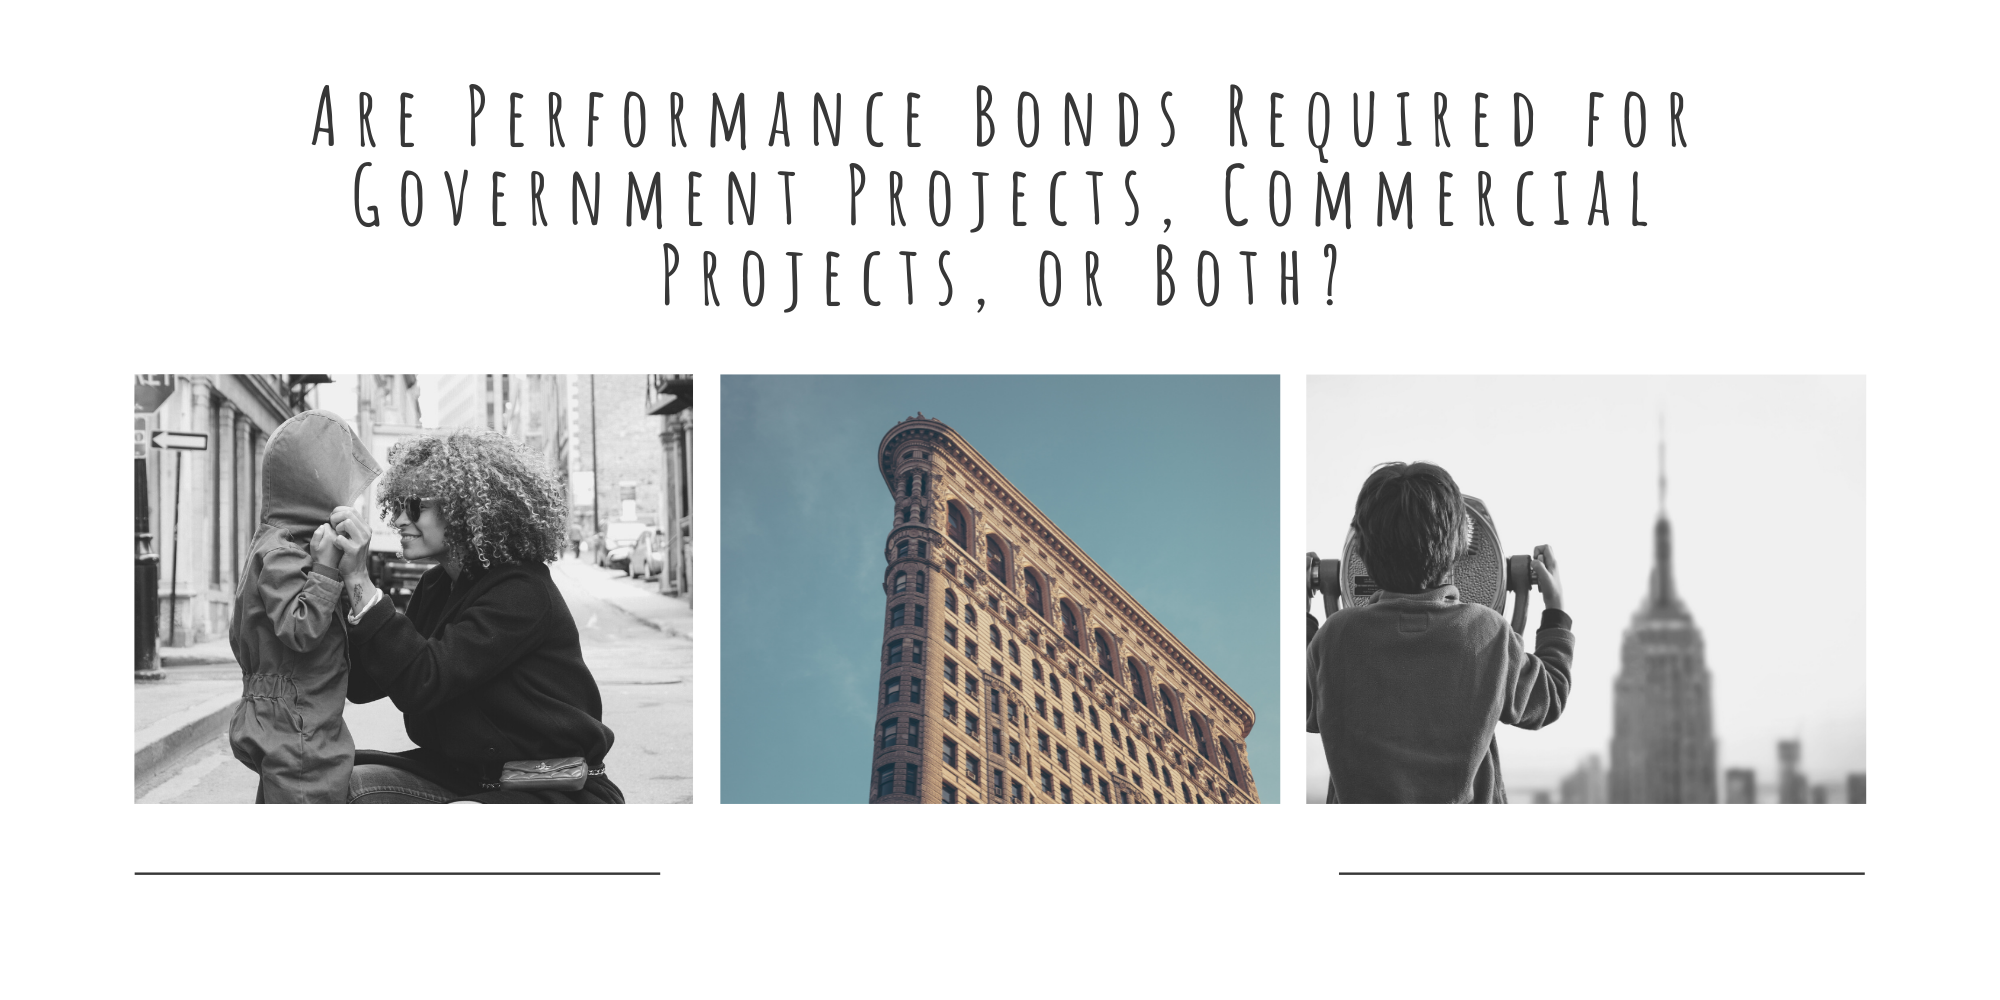 performance bond - are performance bonds required on private projects? - landscapes in minimalist hue